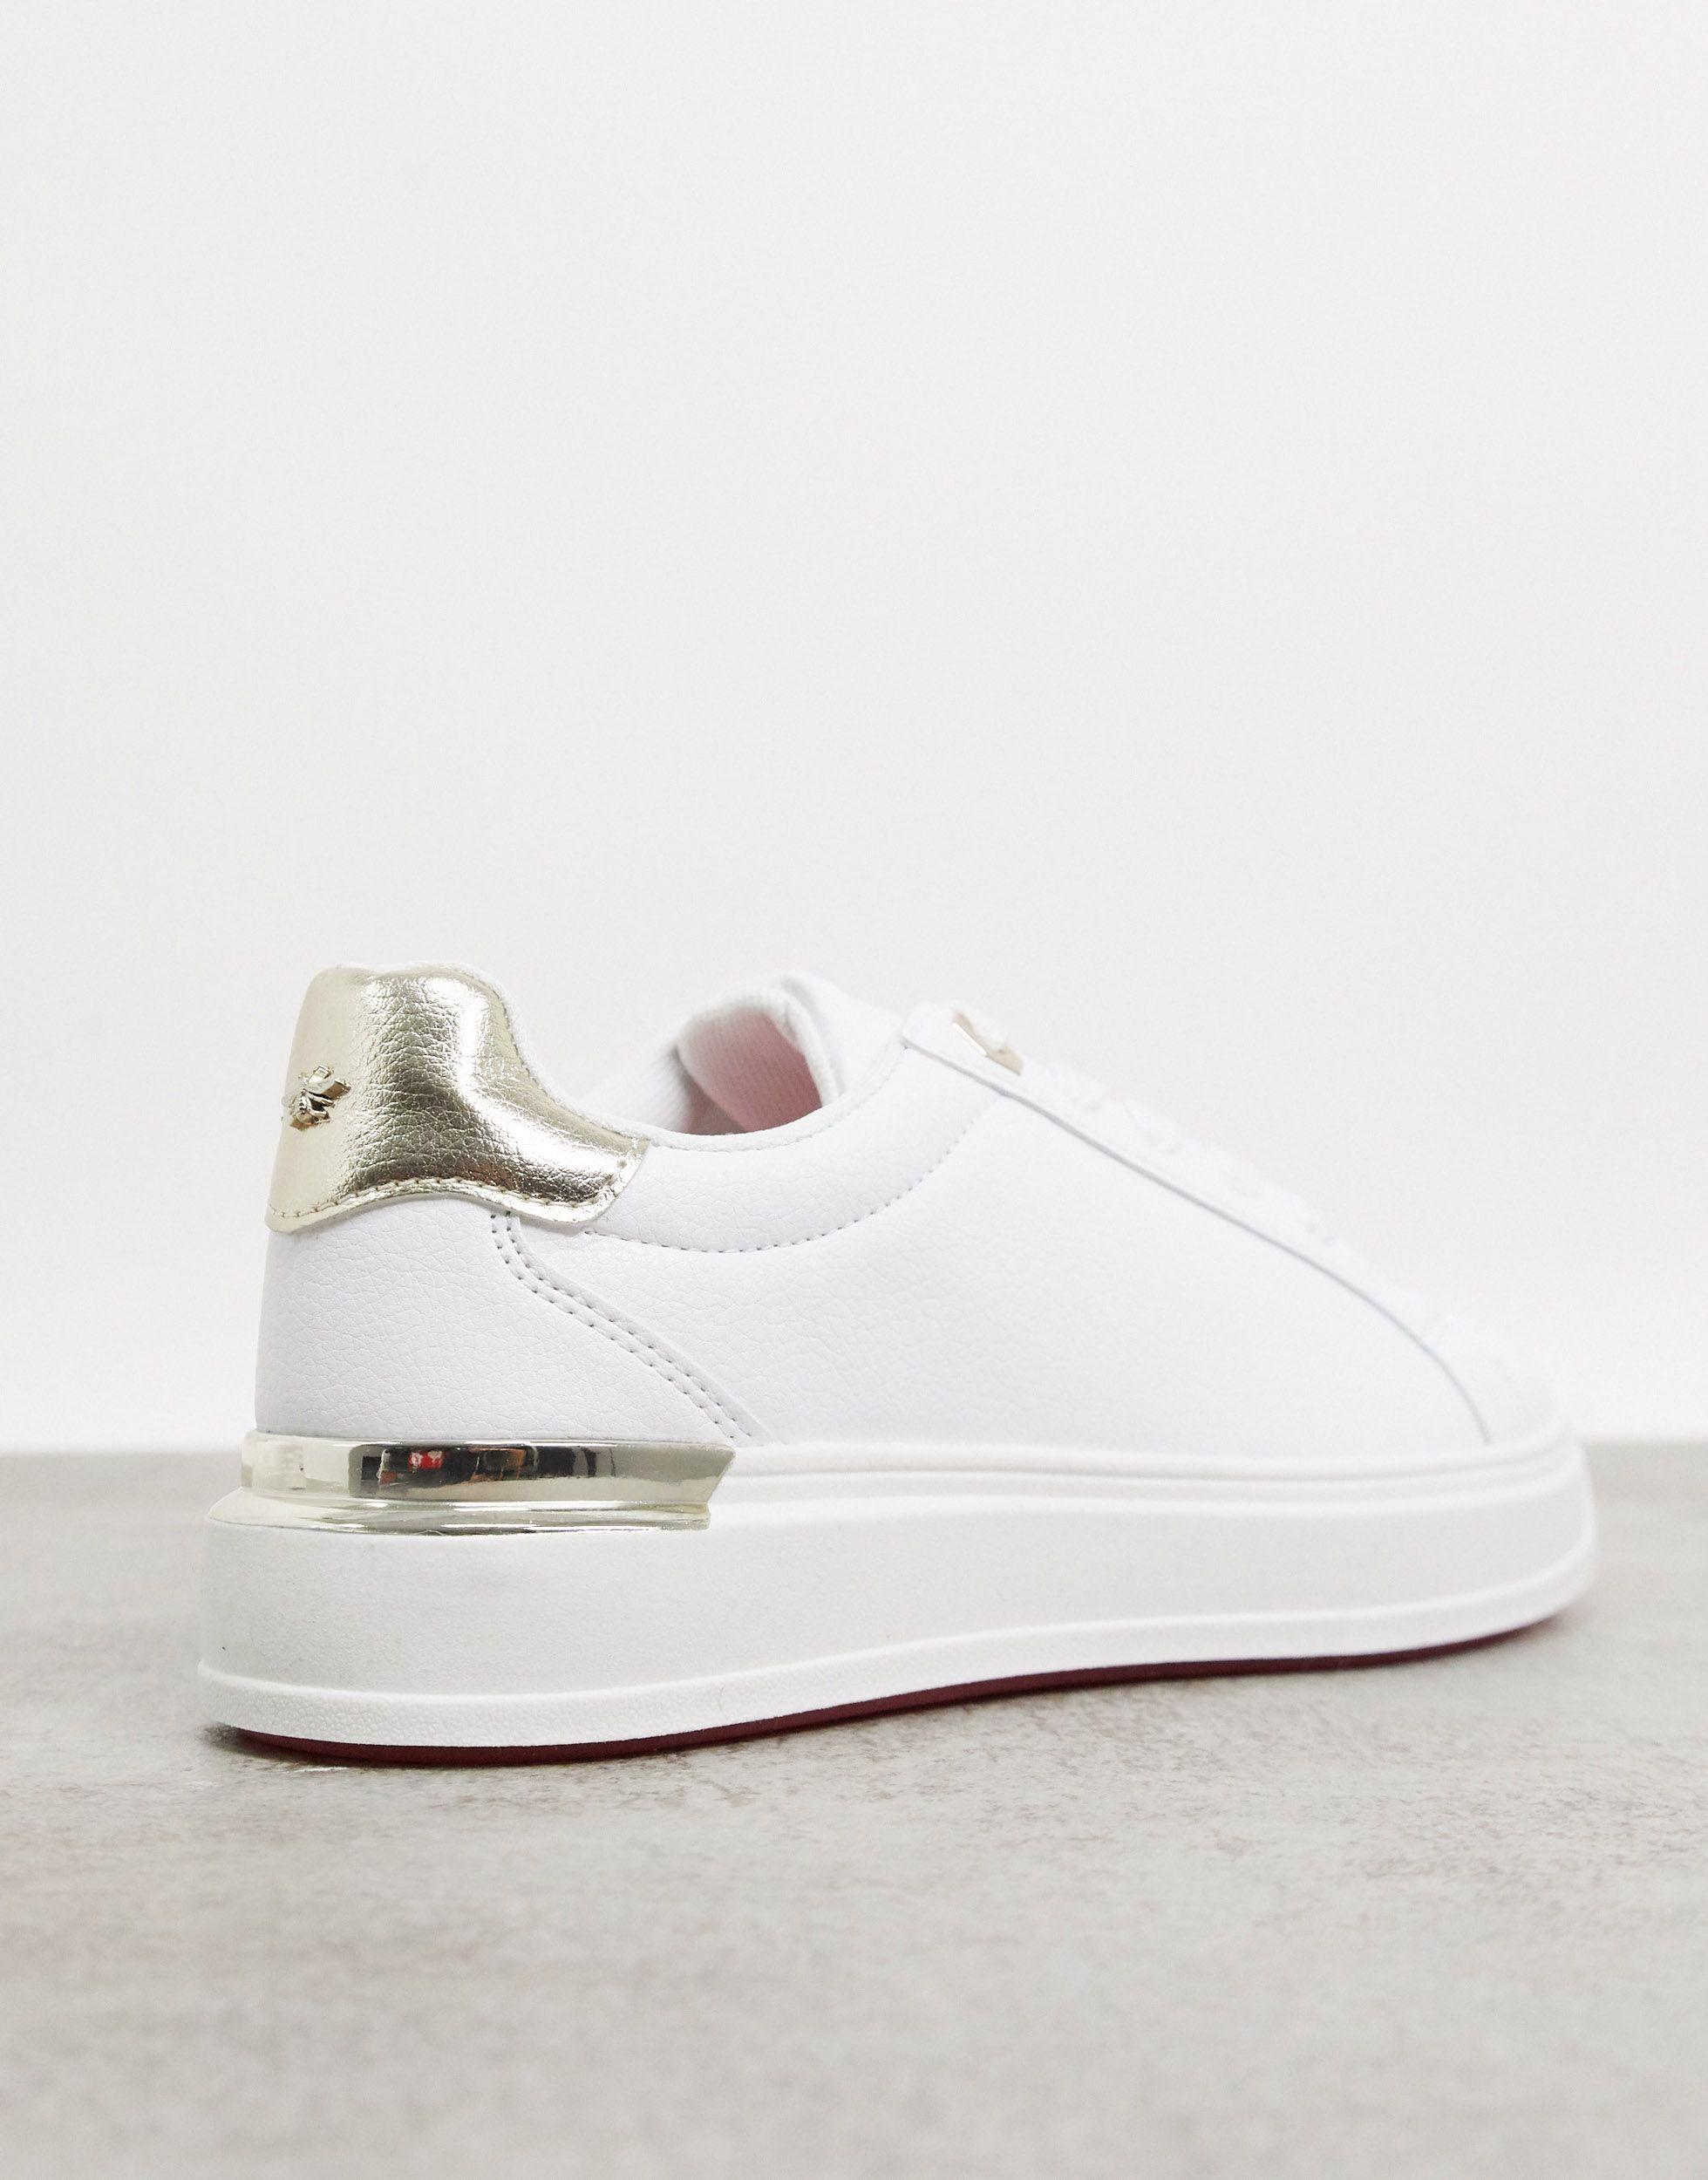 River Island Neon Sole Trainer With Gold Trim in White | Lyst